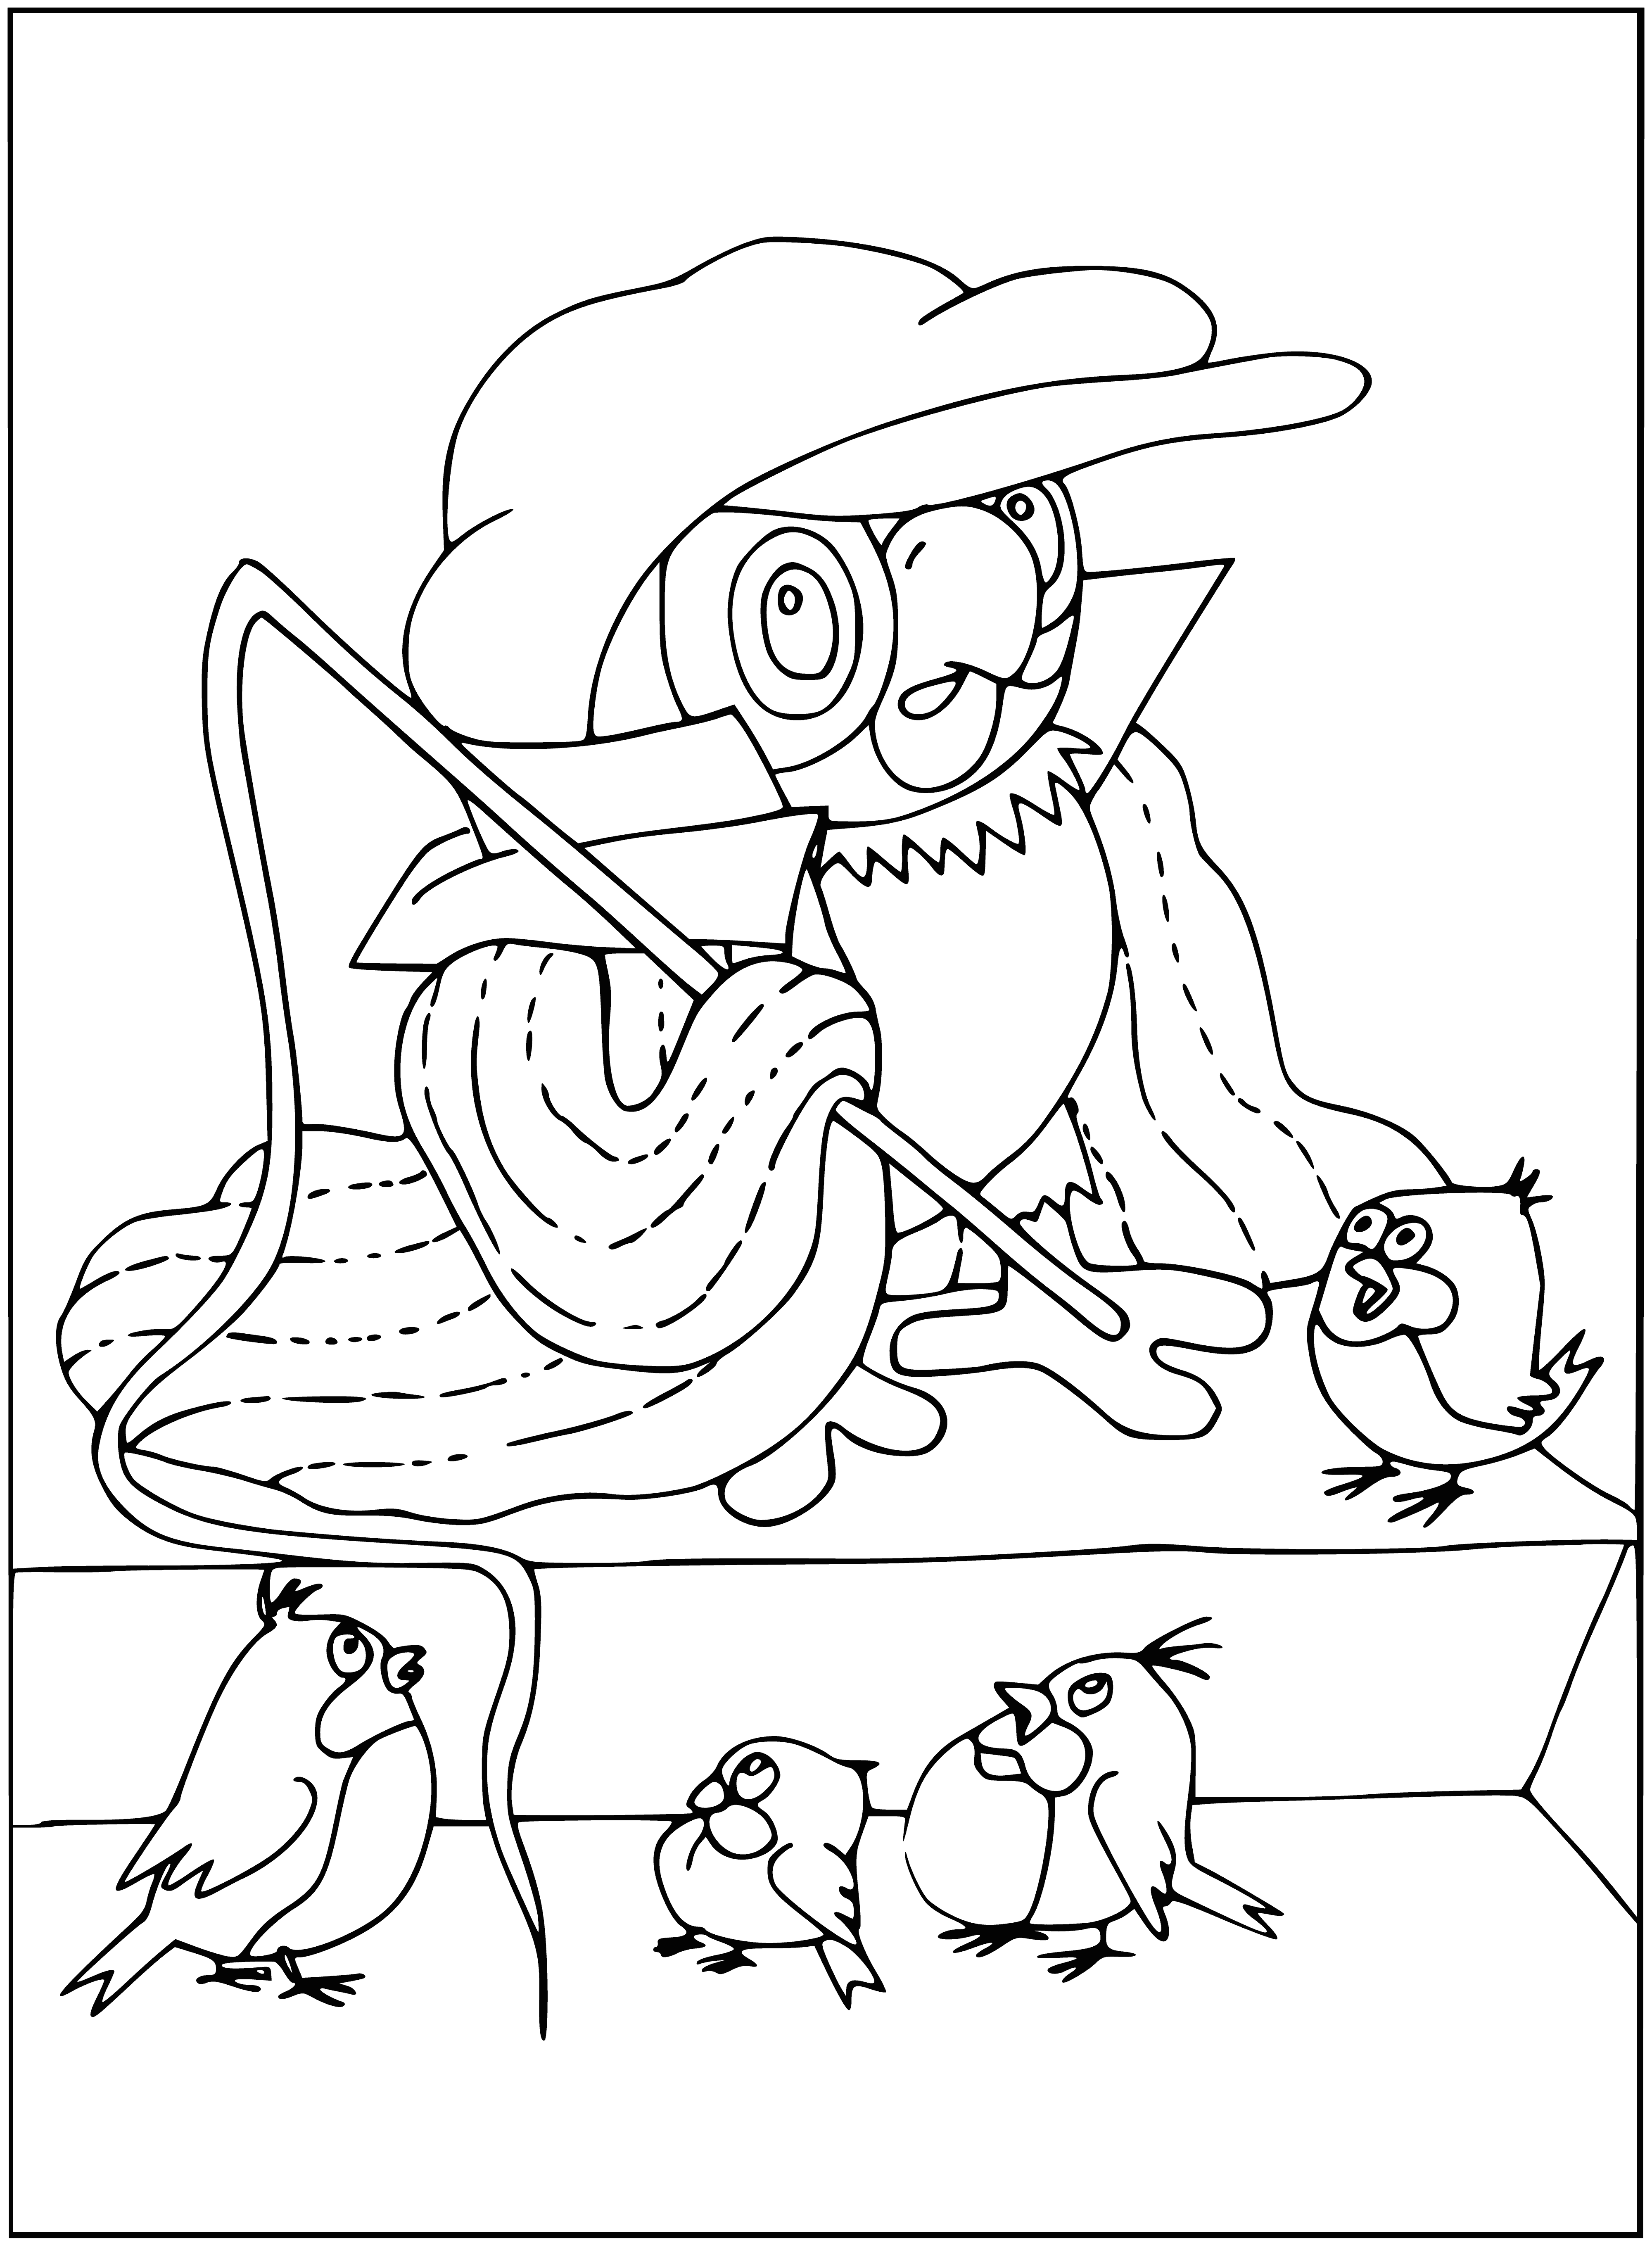 coloring page: Kesha welcomes back a lost parrot with a basket of eggs, standing in front of her farm's barn with a horse & chicken coop.